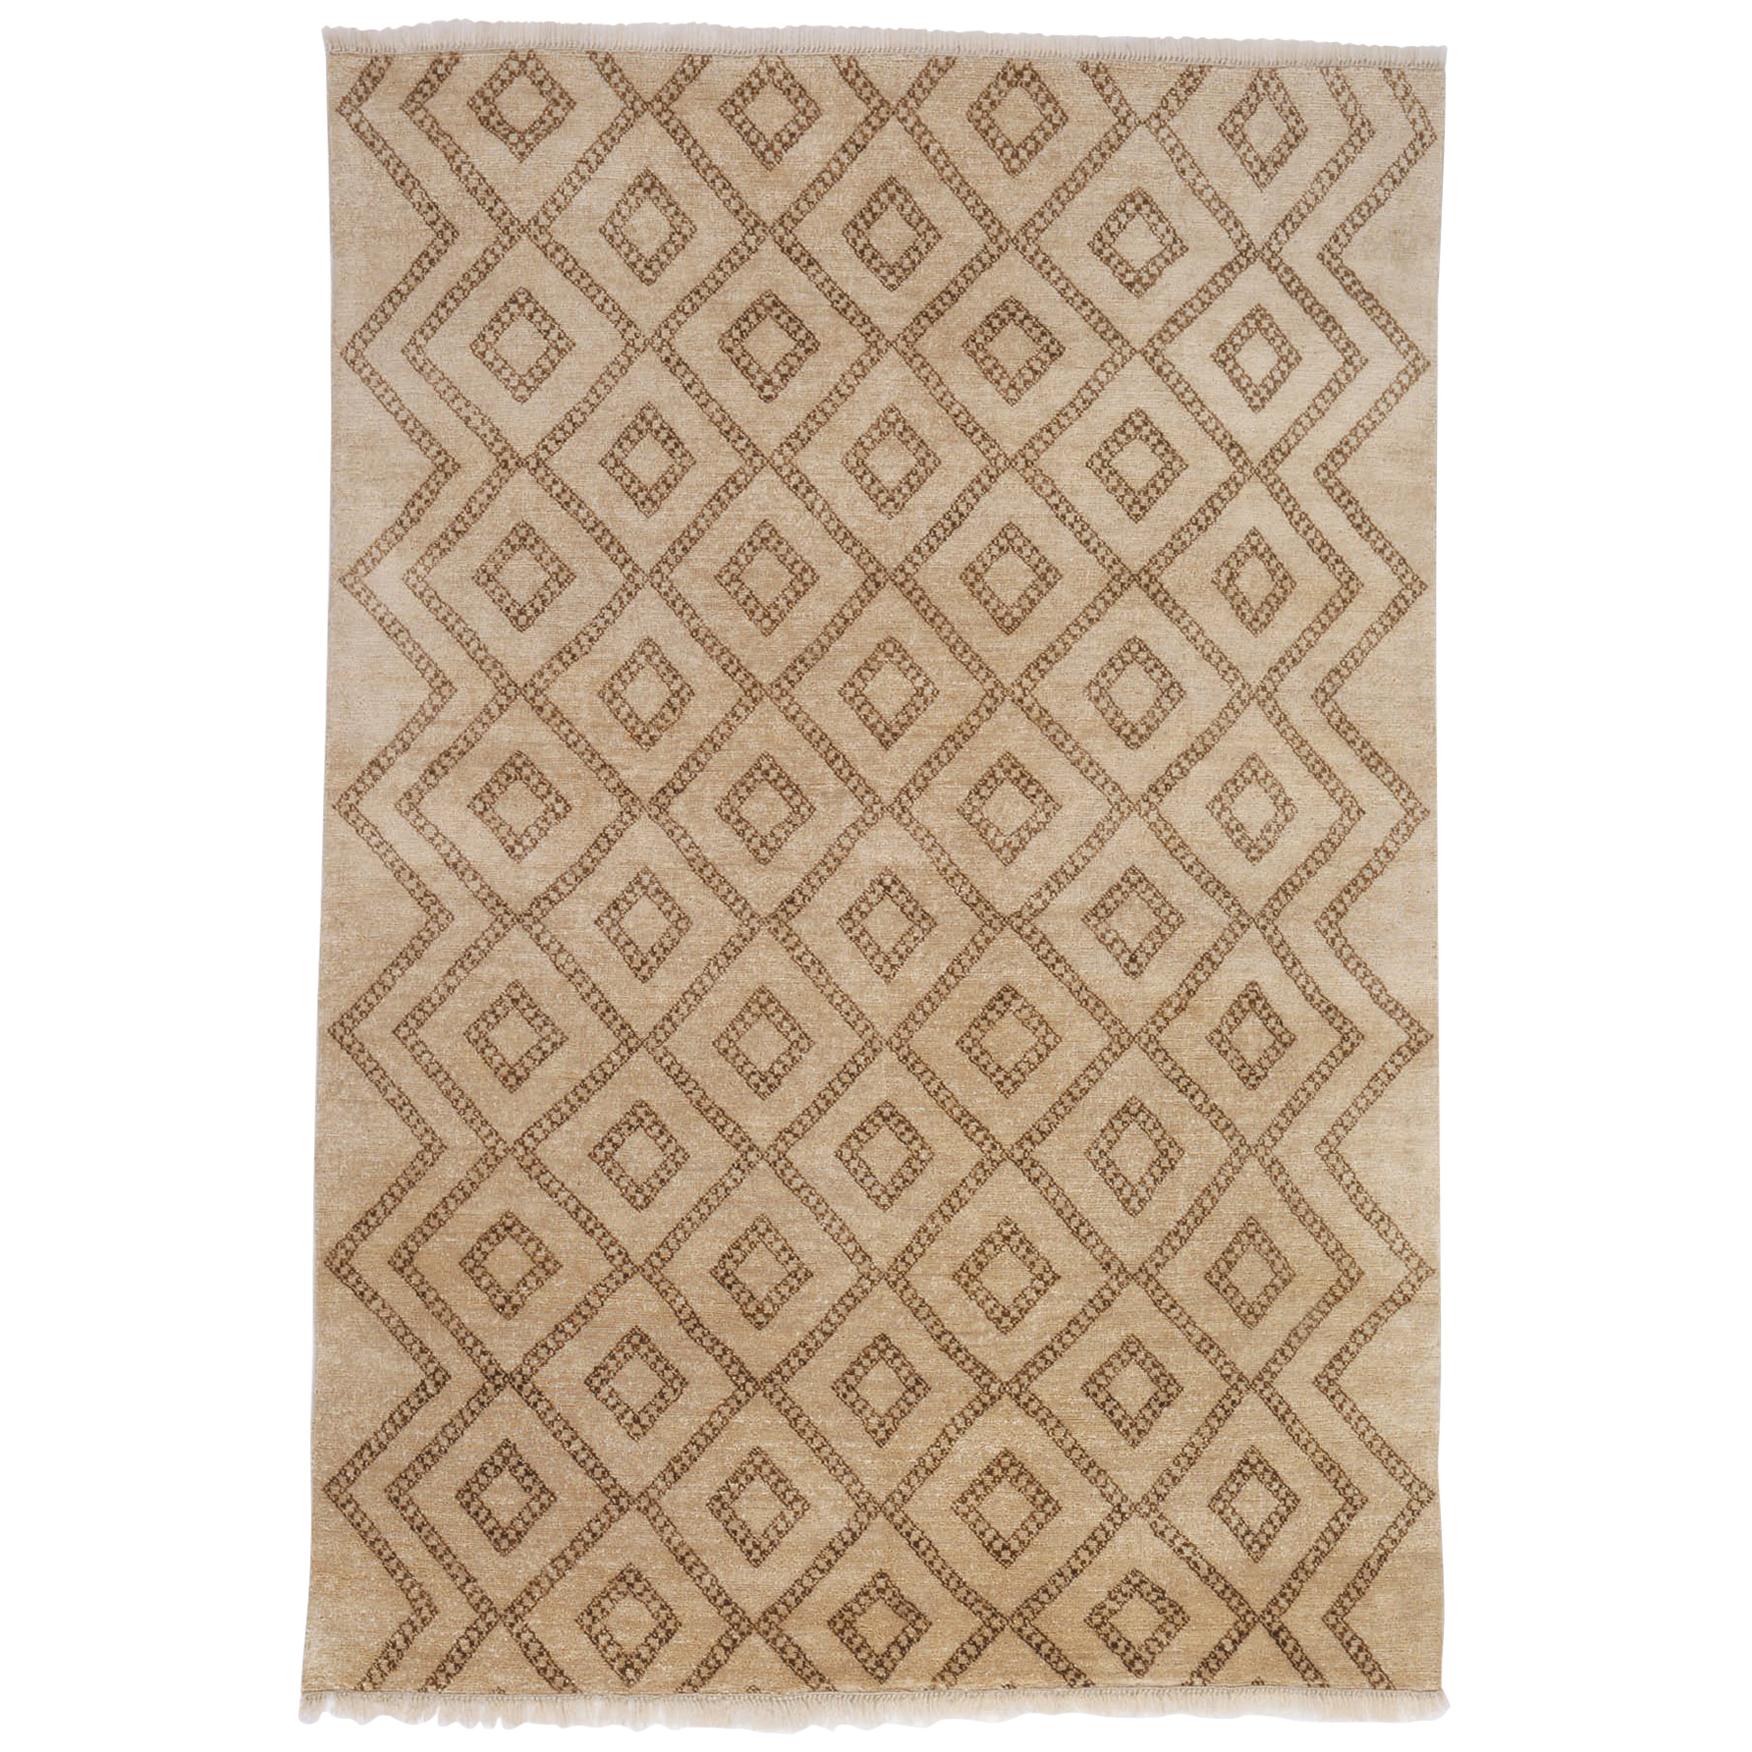 Berber Hand-Knotted 10x8 Rug in Wool by The Rug Company